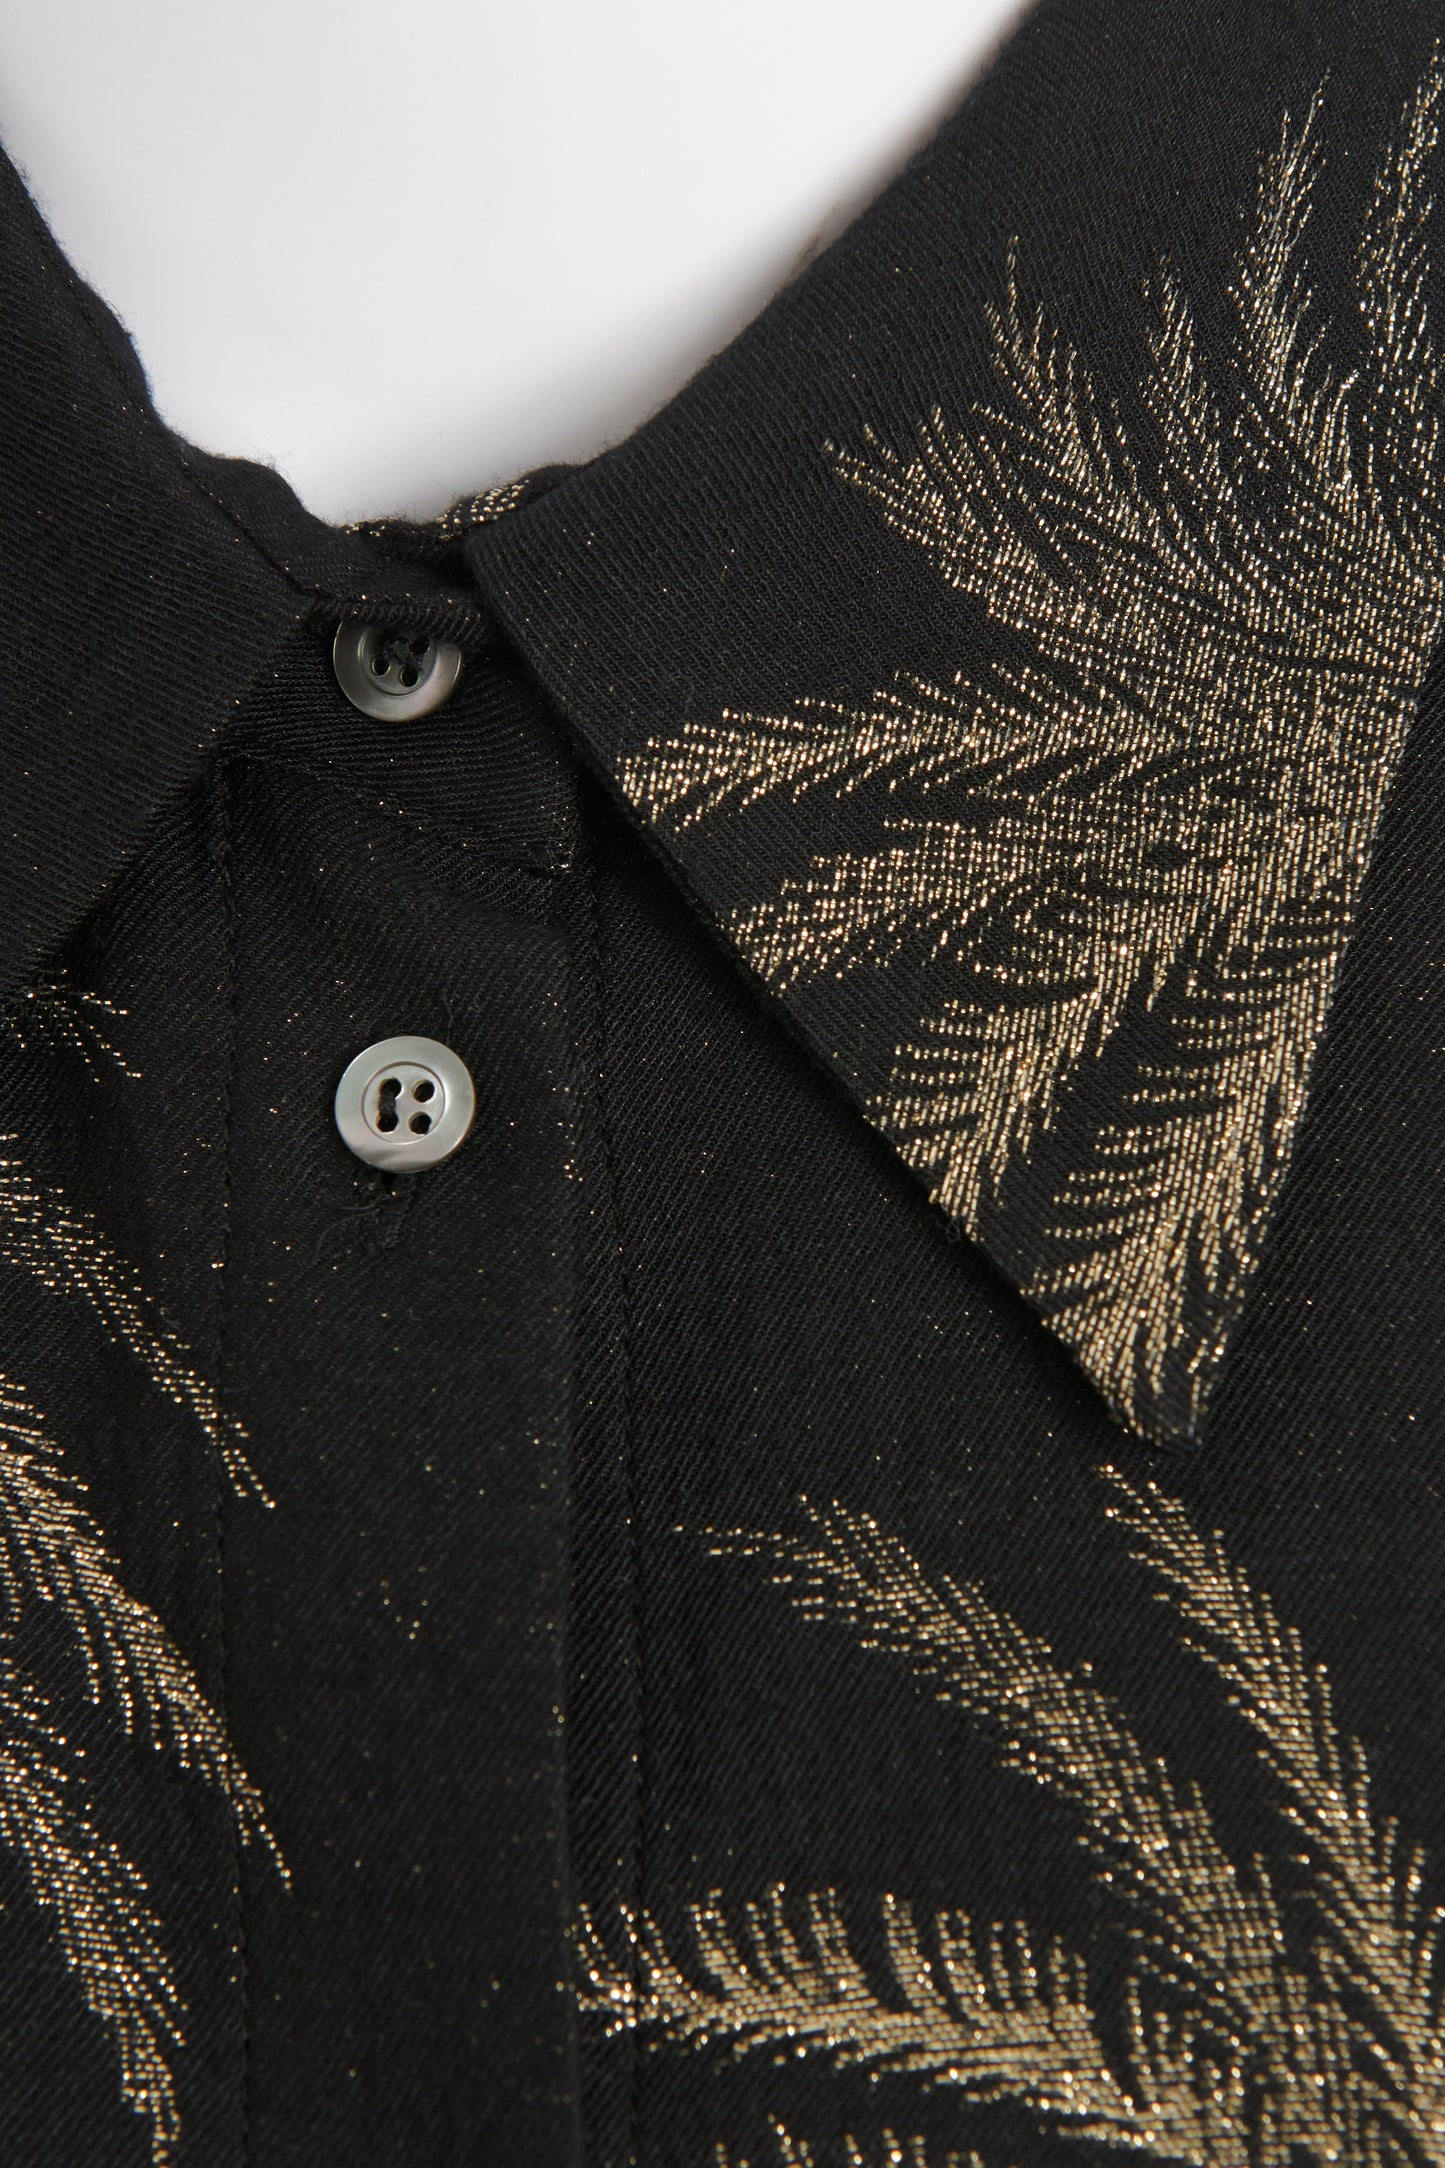 Black and Gold Palm Tree Preowned Shirt